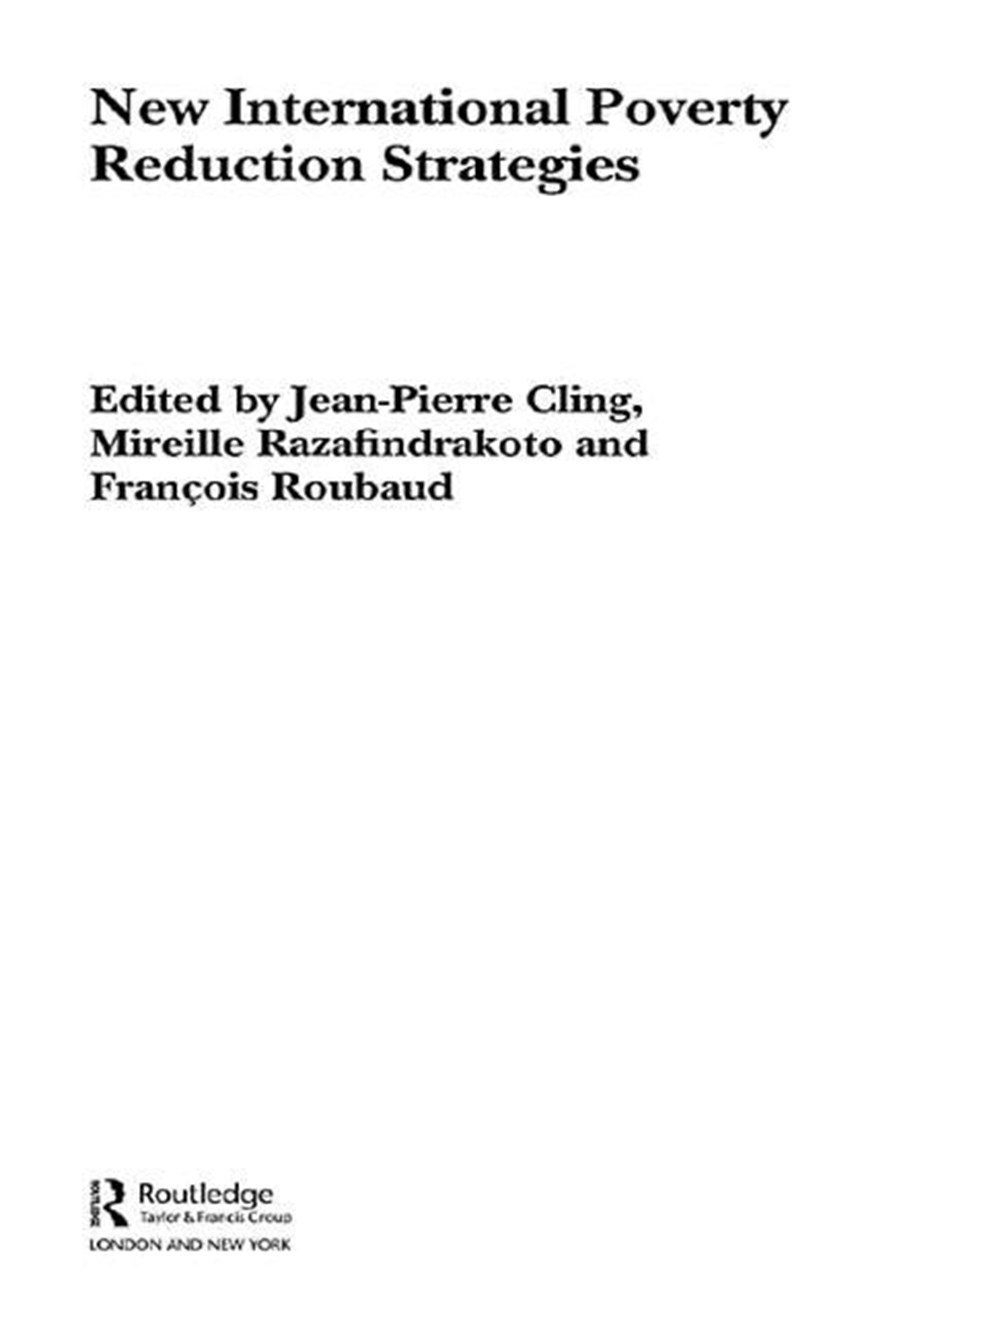 New International Poverty Reduction Strategies (Revised)